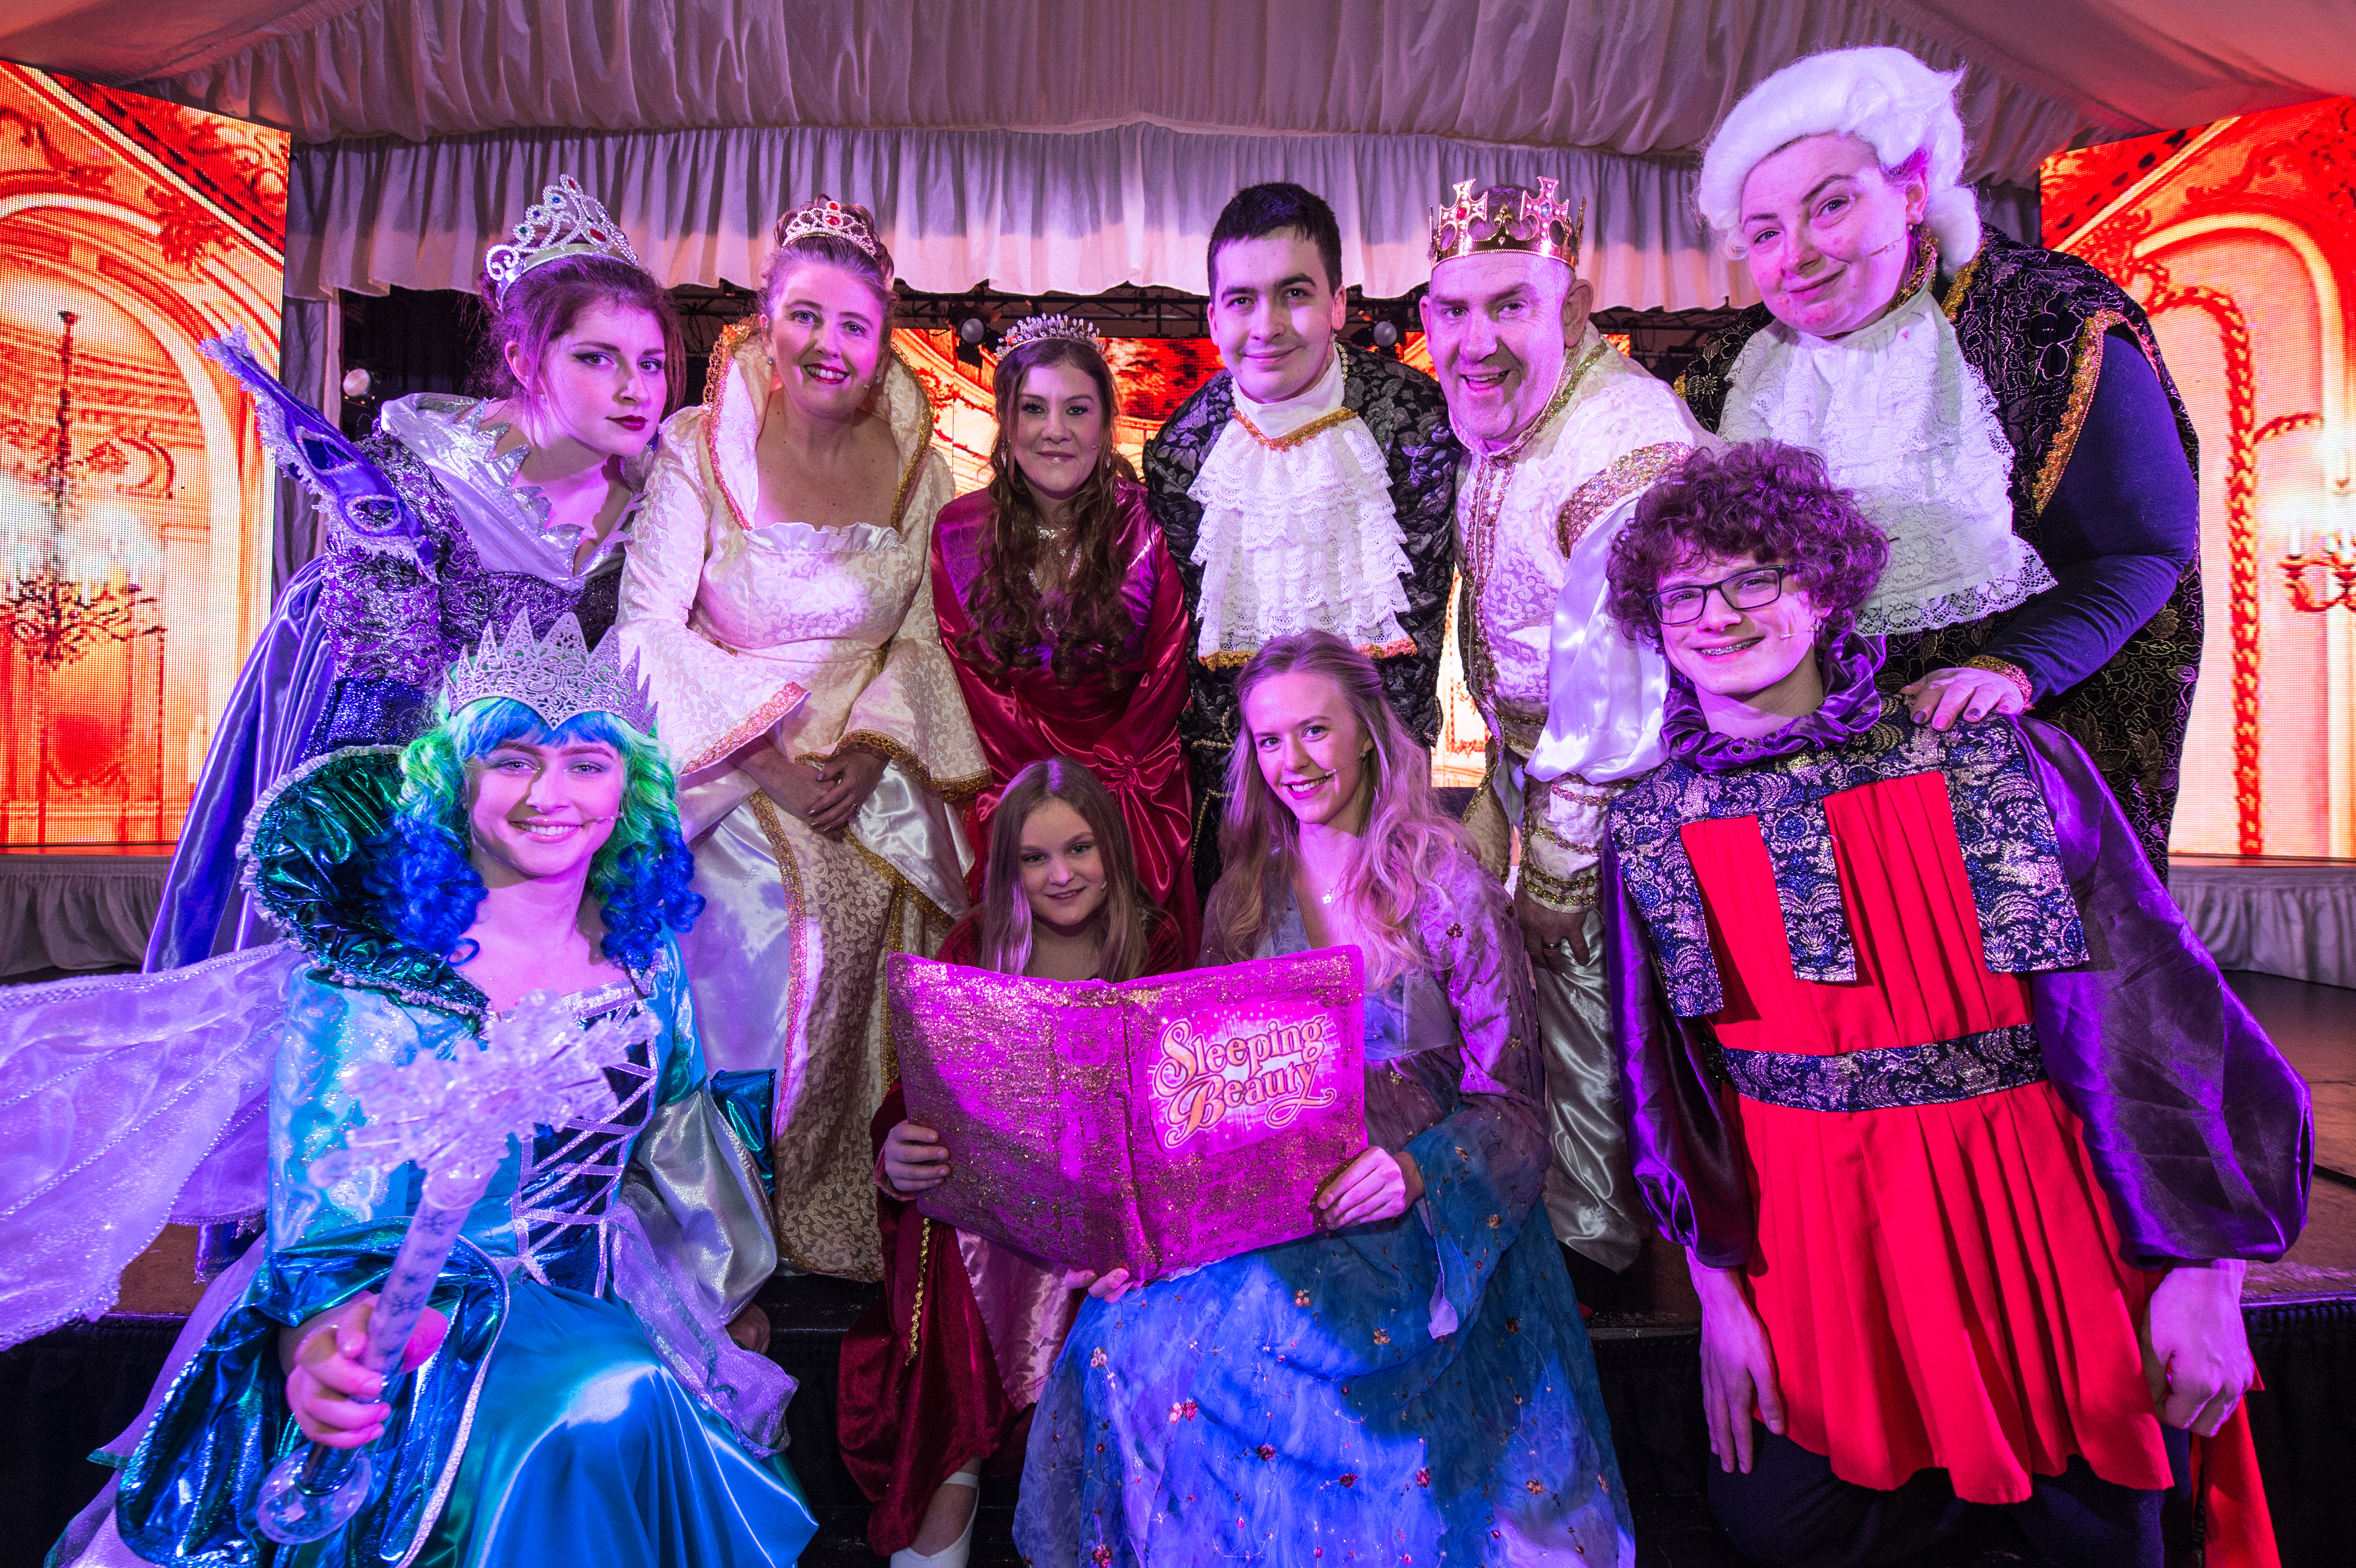 Danya Smith who plays Sleeping Beauty, back row third from left, with other members of the cast.